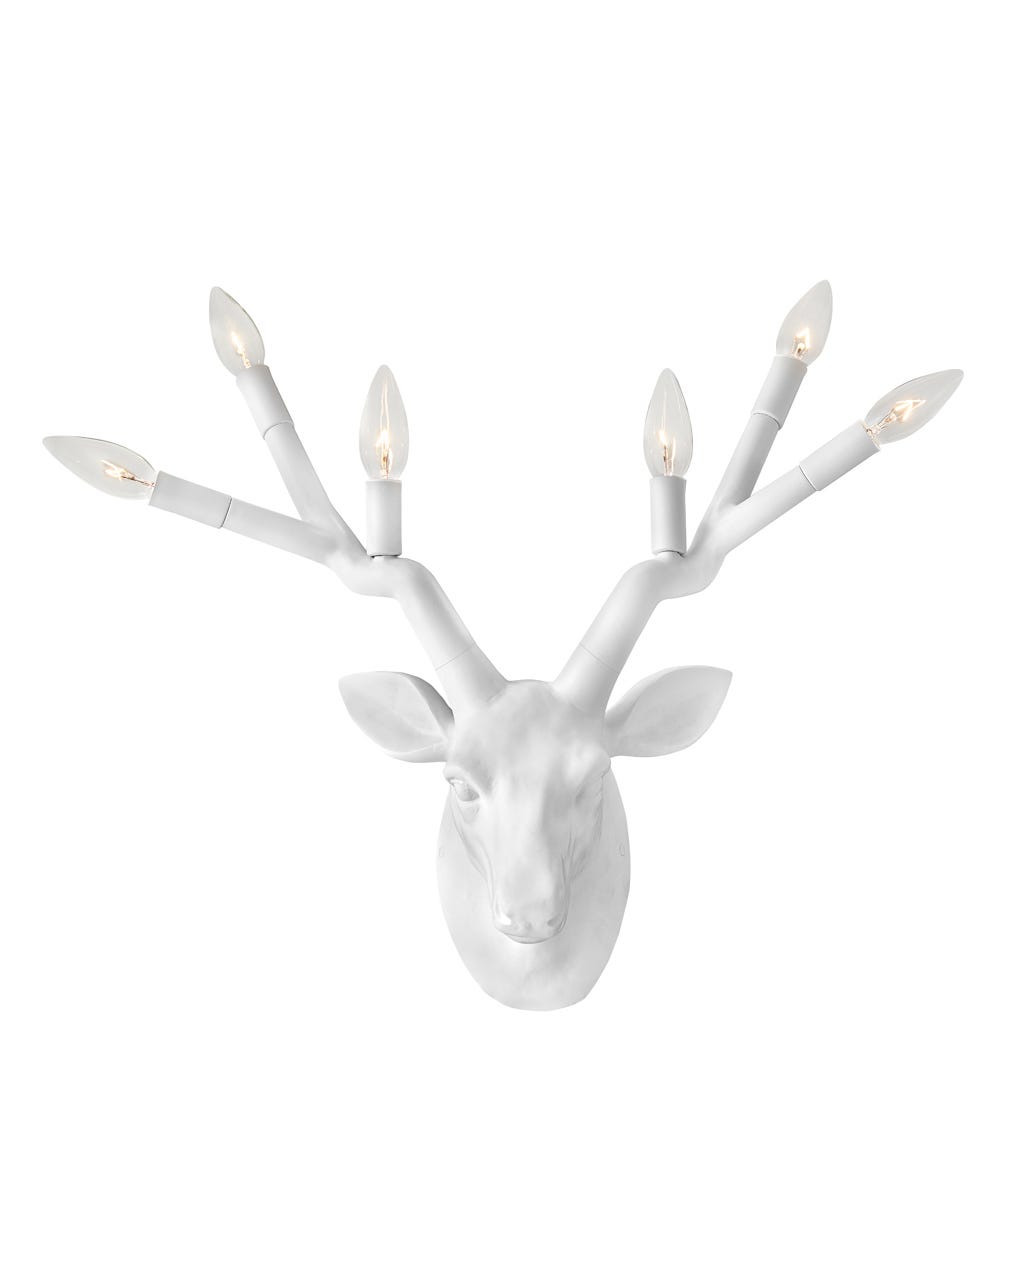 Hinkley Stag Sconce